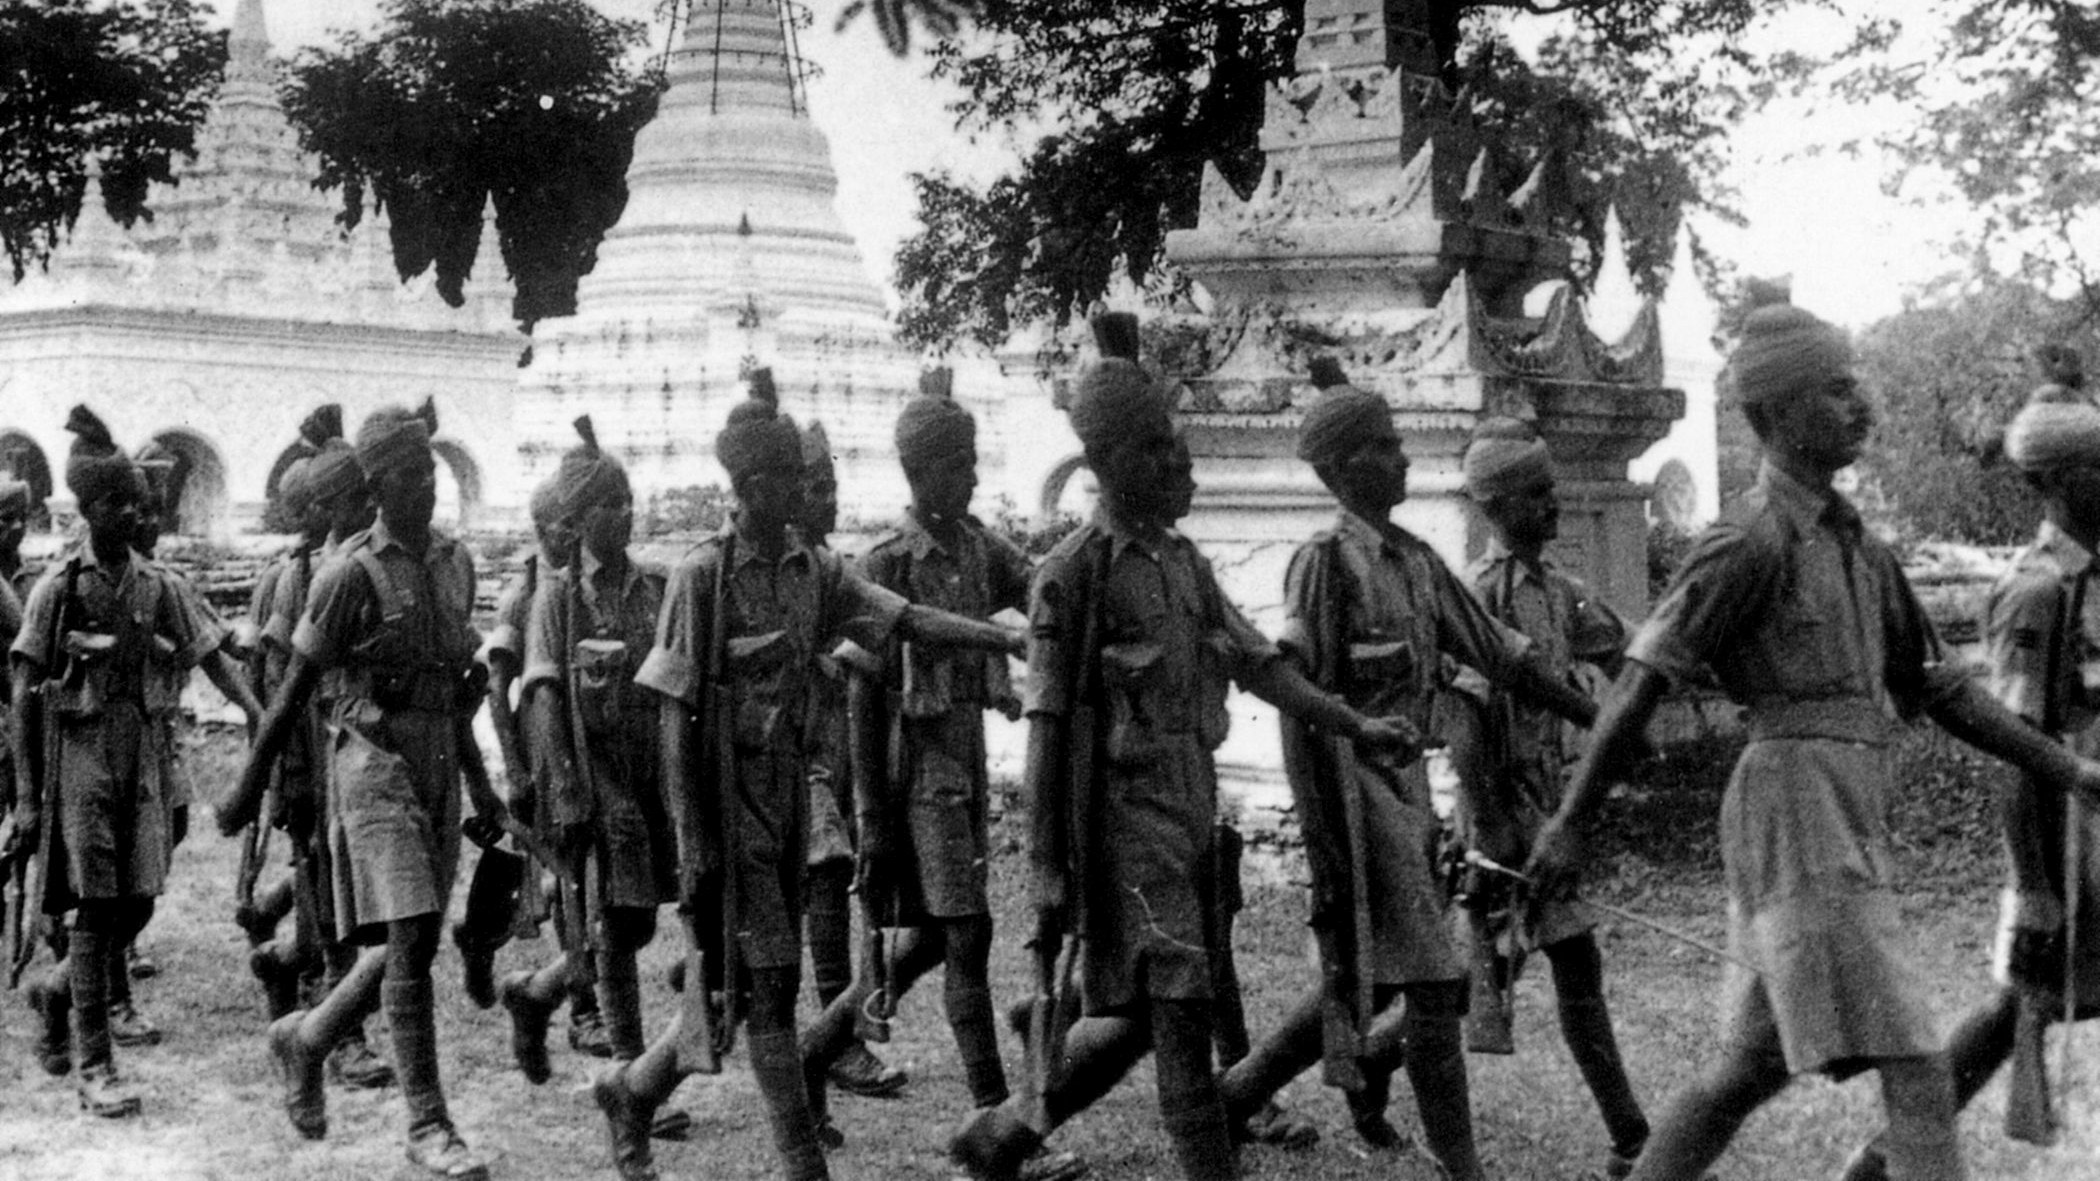 Preparing for an invasion by the Japanese, Indian troops, which comprised a large number of the British Commonwealth forces in Burma, march past a pagoda toward defensive positions. (Imperial War Museum)